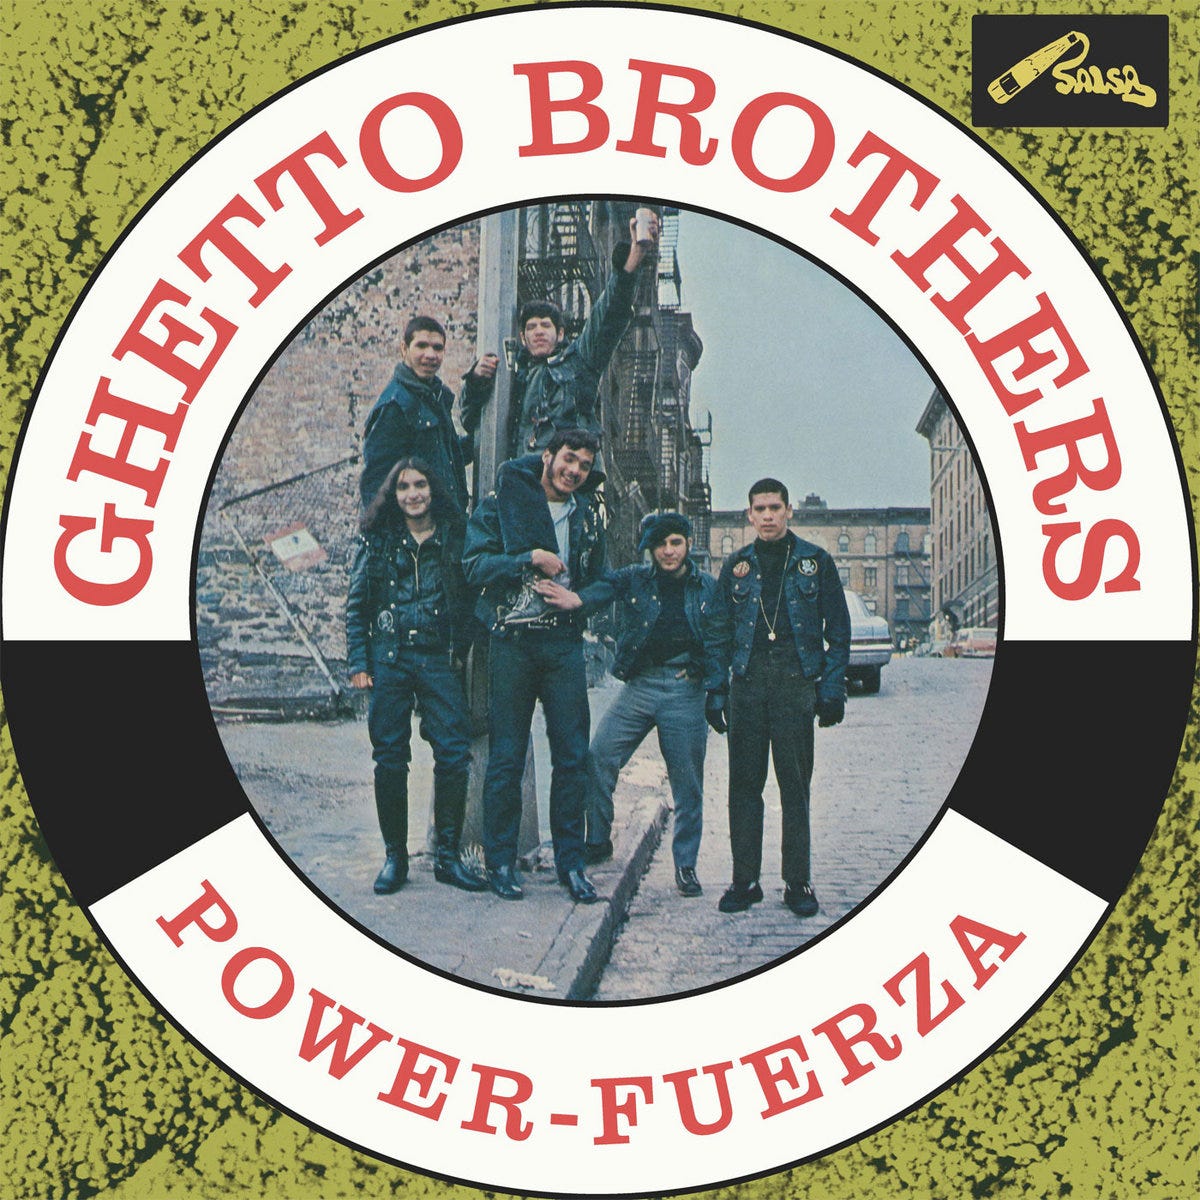 GHETTO BROTHERS - Power-Fuerza (1972) | Everland Music